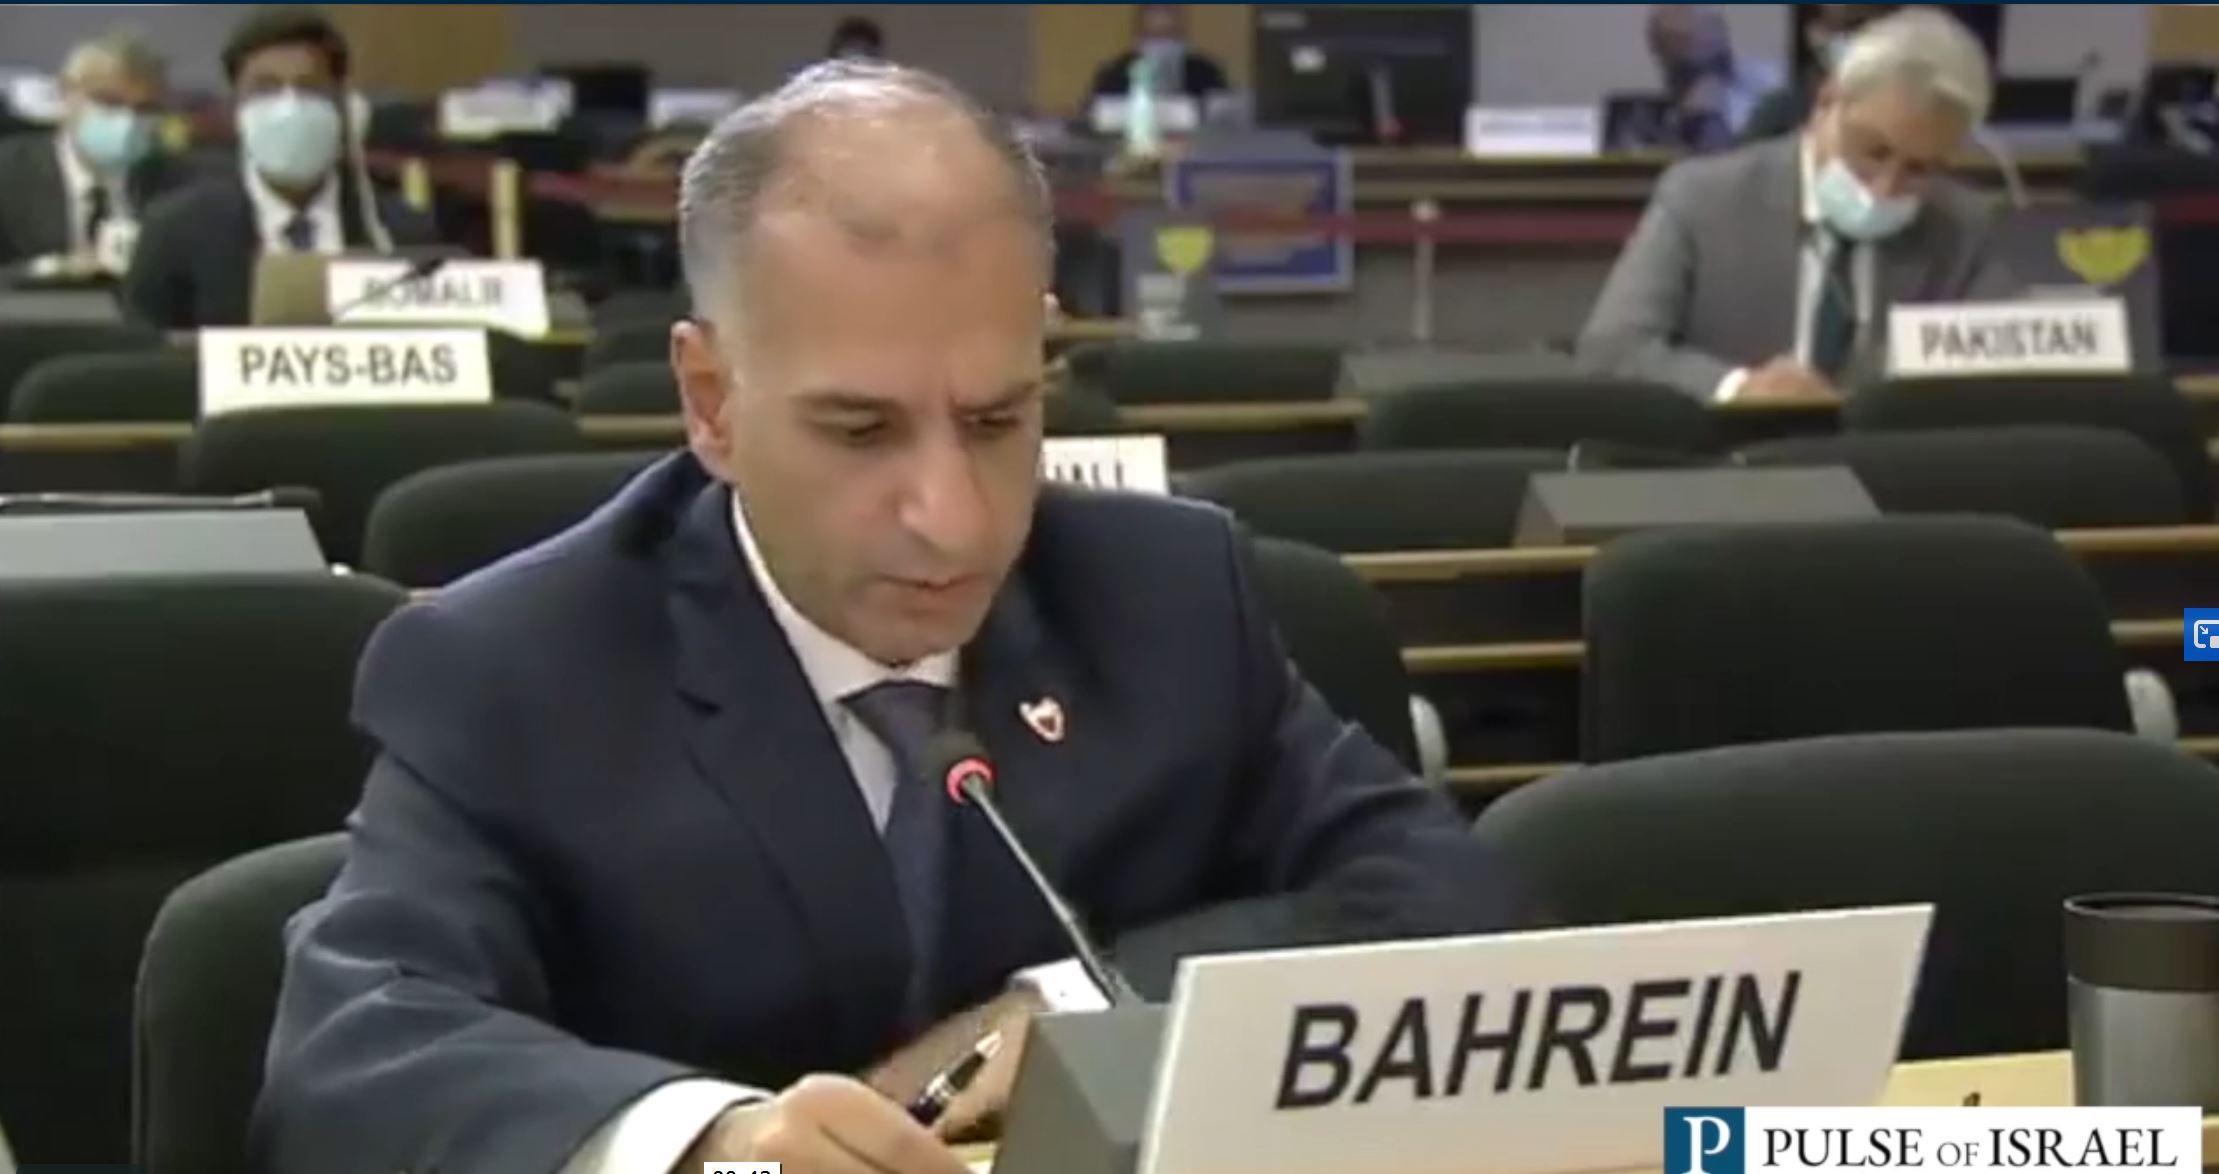 Bahrein stands up for Israel at the UN